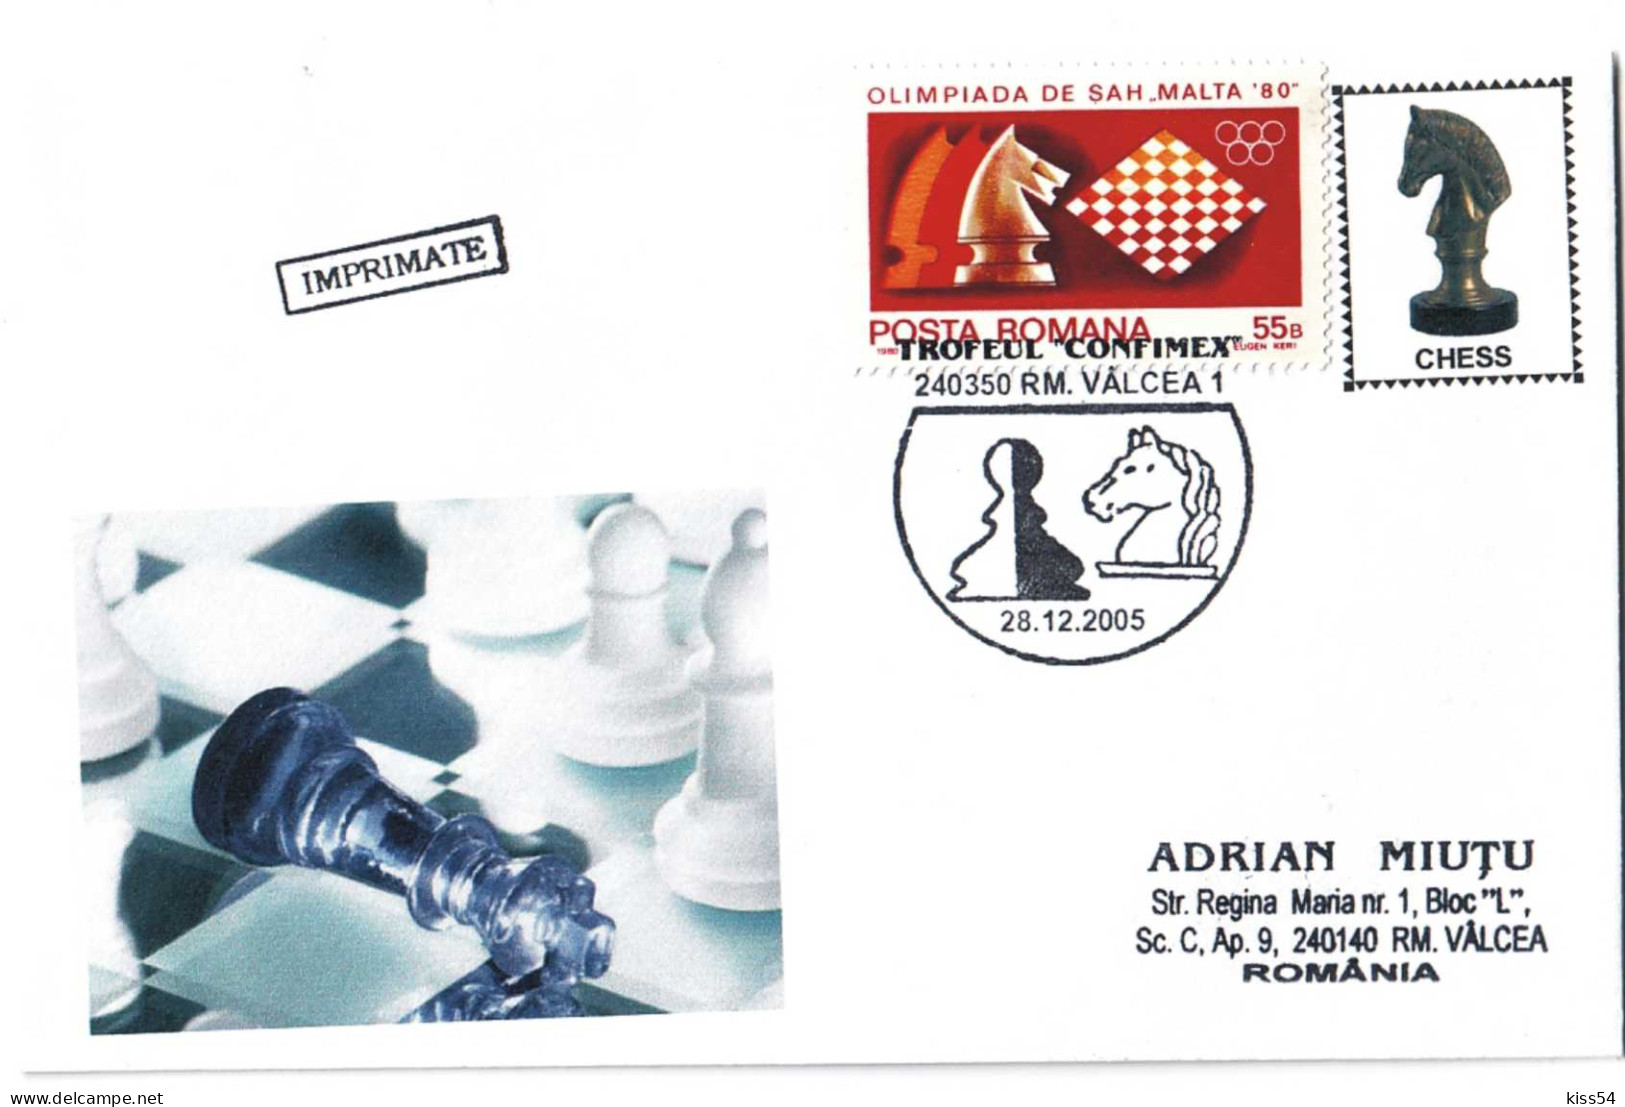 COV 82 - 212 CHESS, Romania - Cover - Used - 2005 - Covers & Documents